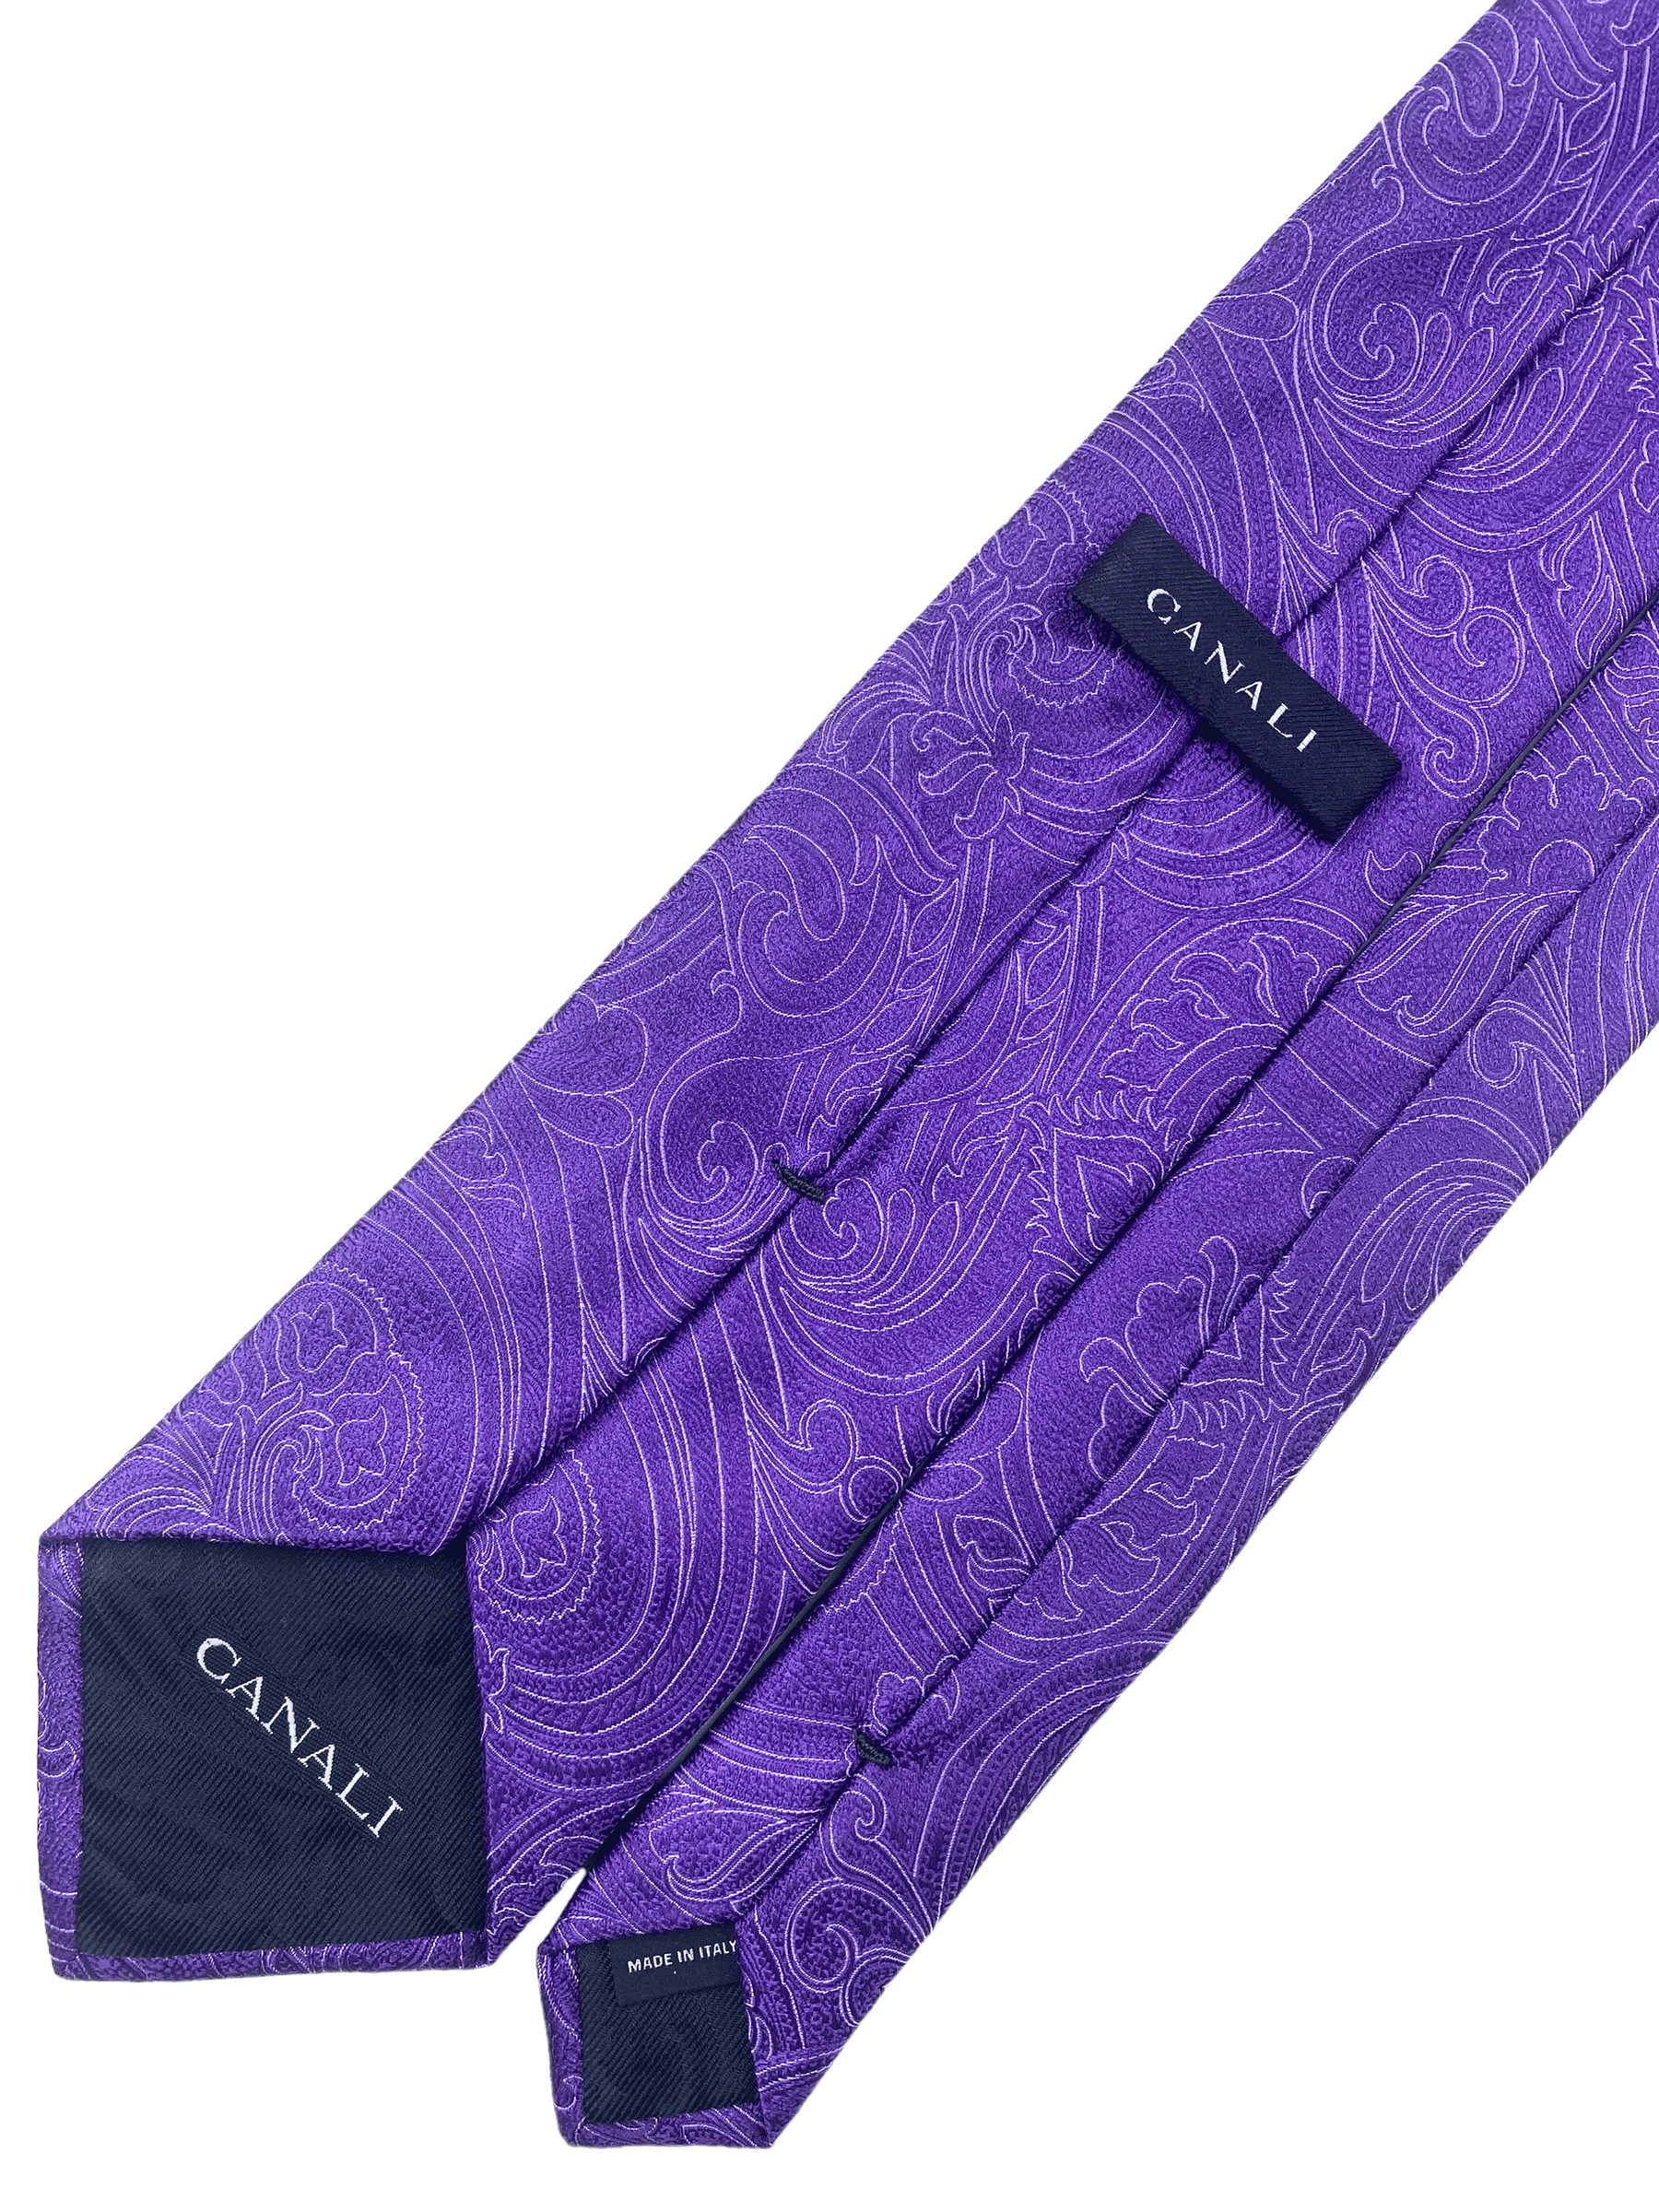 Canali Purple Paisley Silk Tie - Genuine Design luxury consignment Calgary, Alberta, Canada New & pre-owned clothing, shoes, accessories.